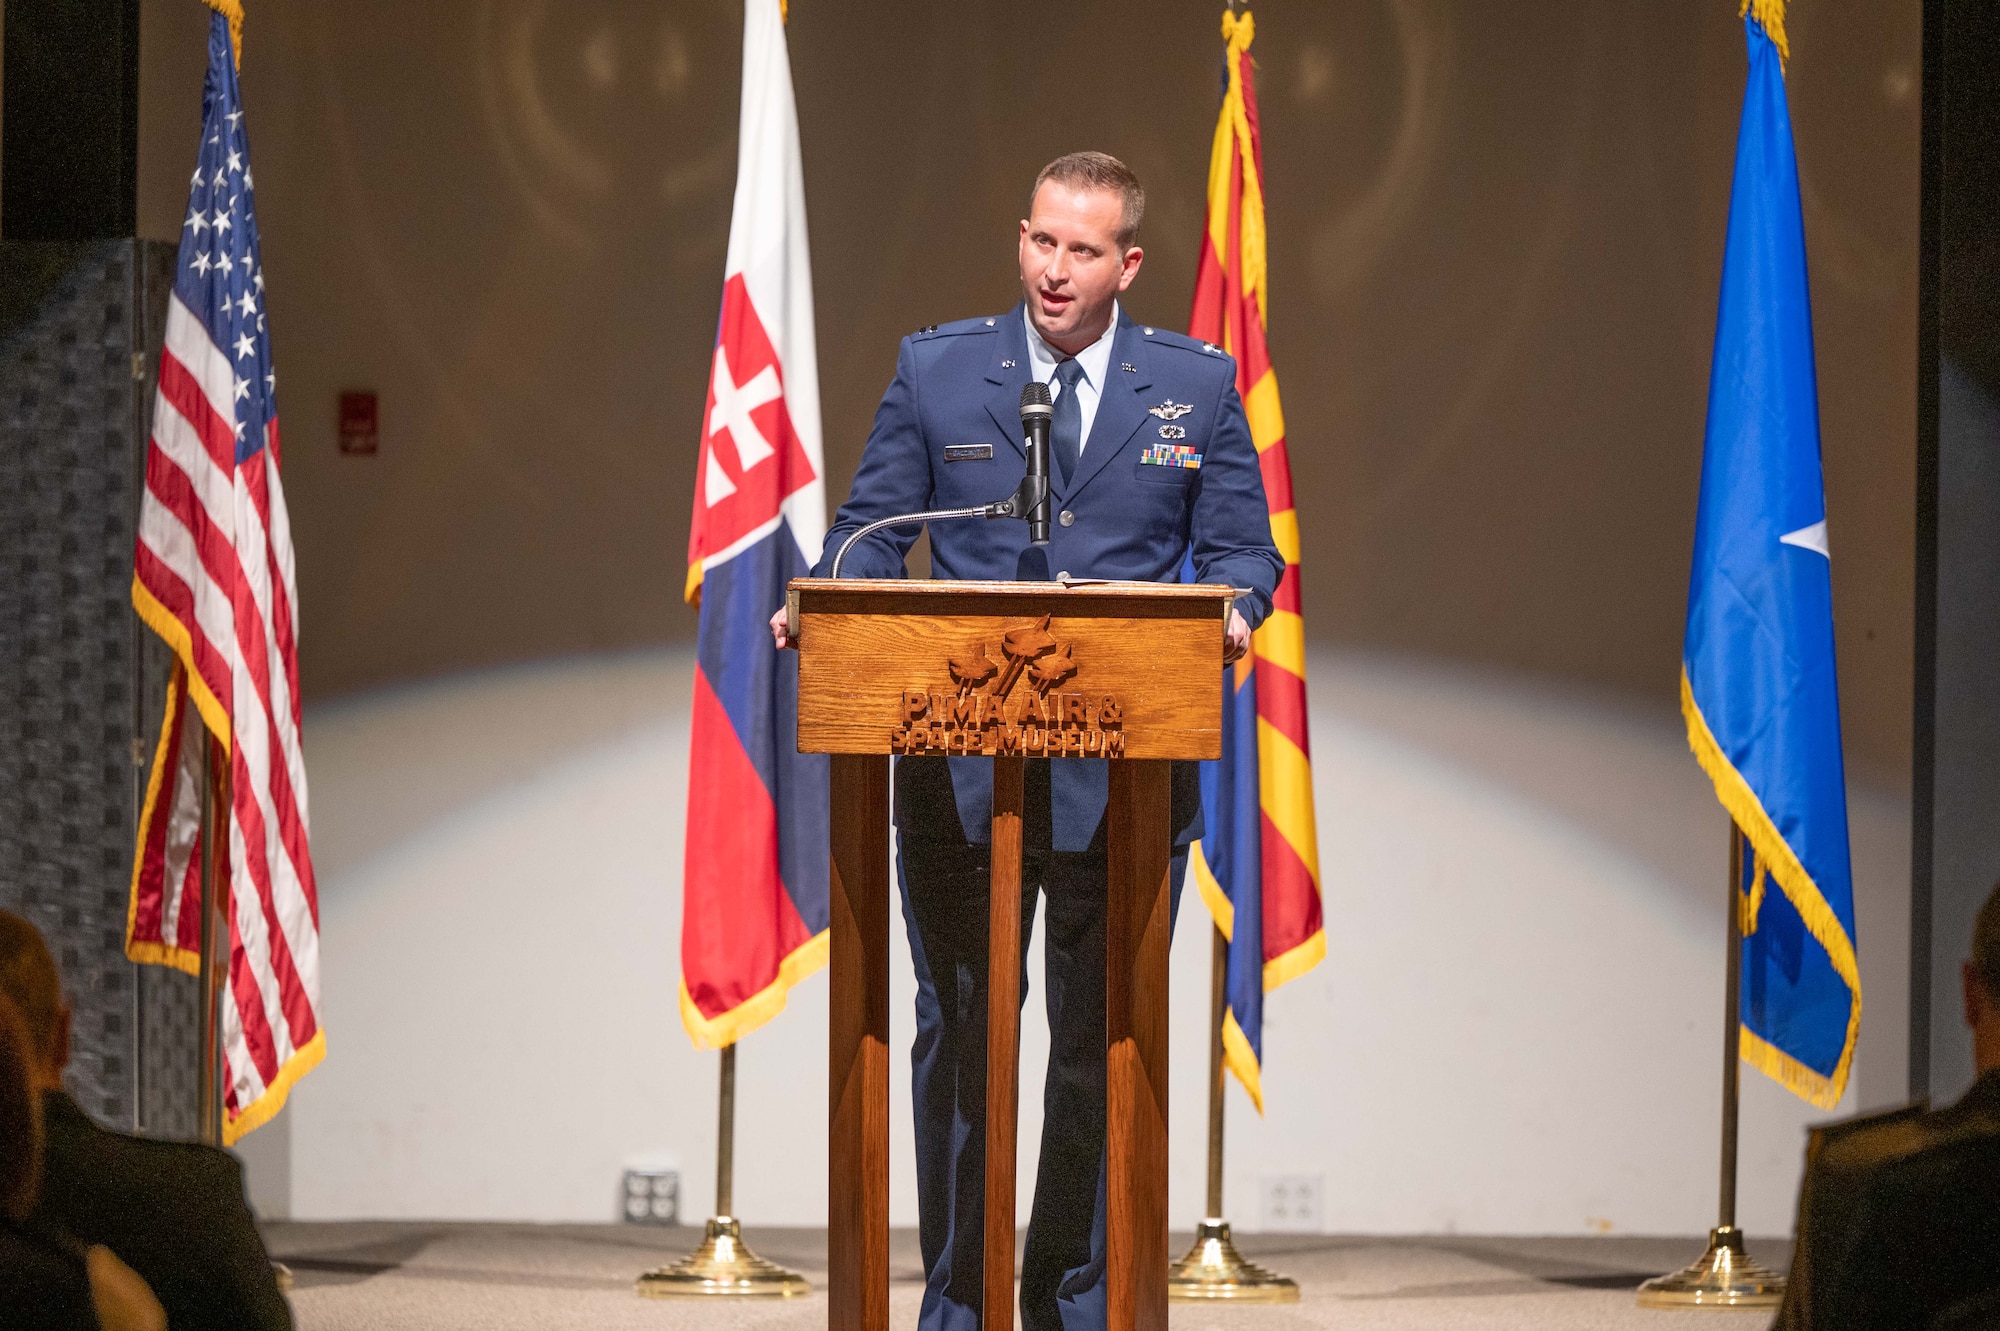 Slovak air force F-16 graduates, speaks at a ceremony at the Pima Air & Space Museum